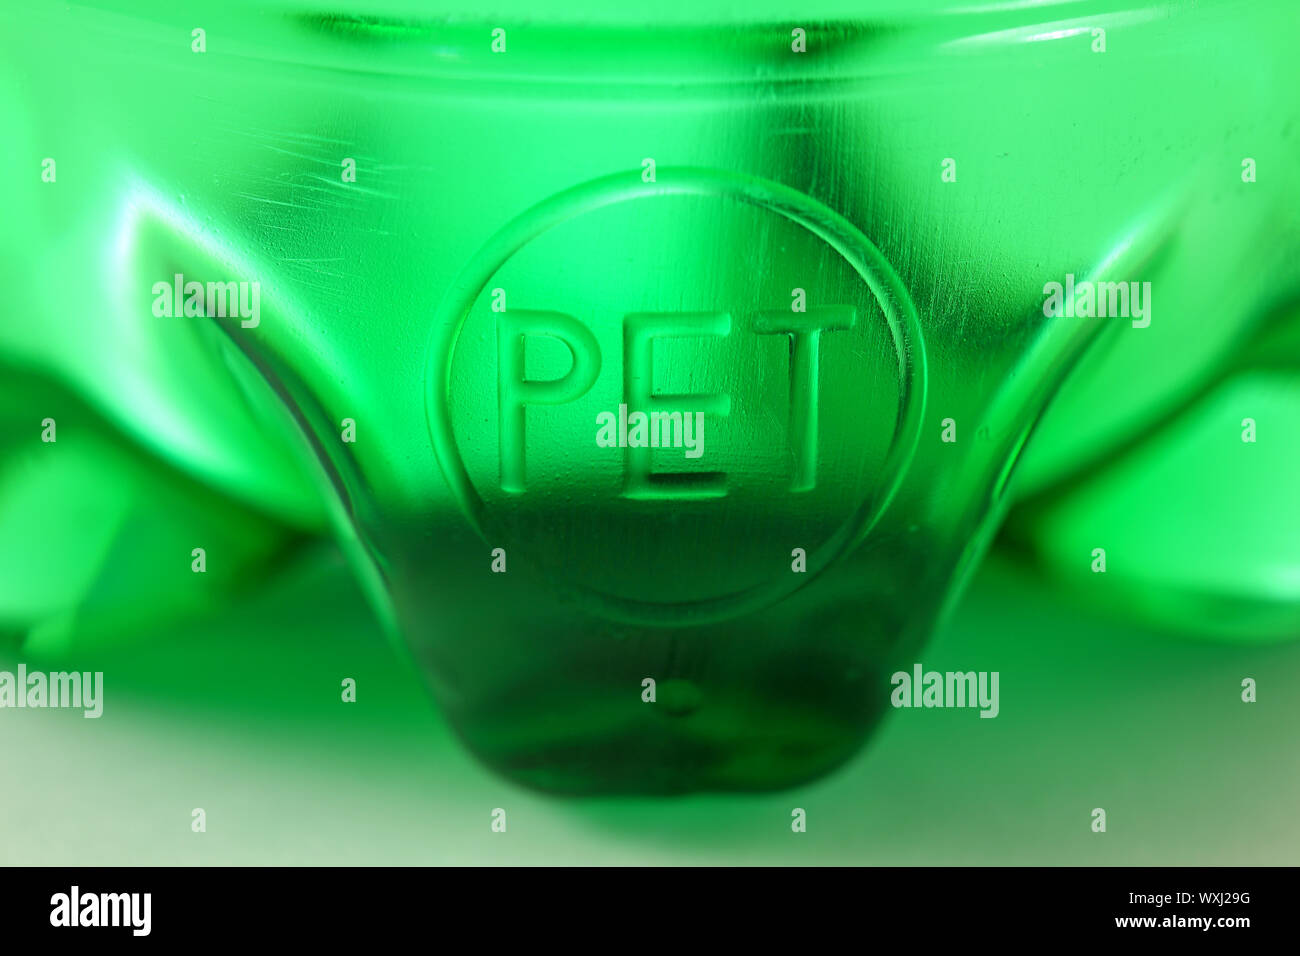 Very nice detail of green plastic sparkling water bottle placed on glass with beautiful reflections of light for an elegant and abstract effect Stock Photo